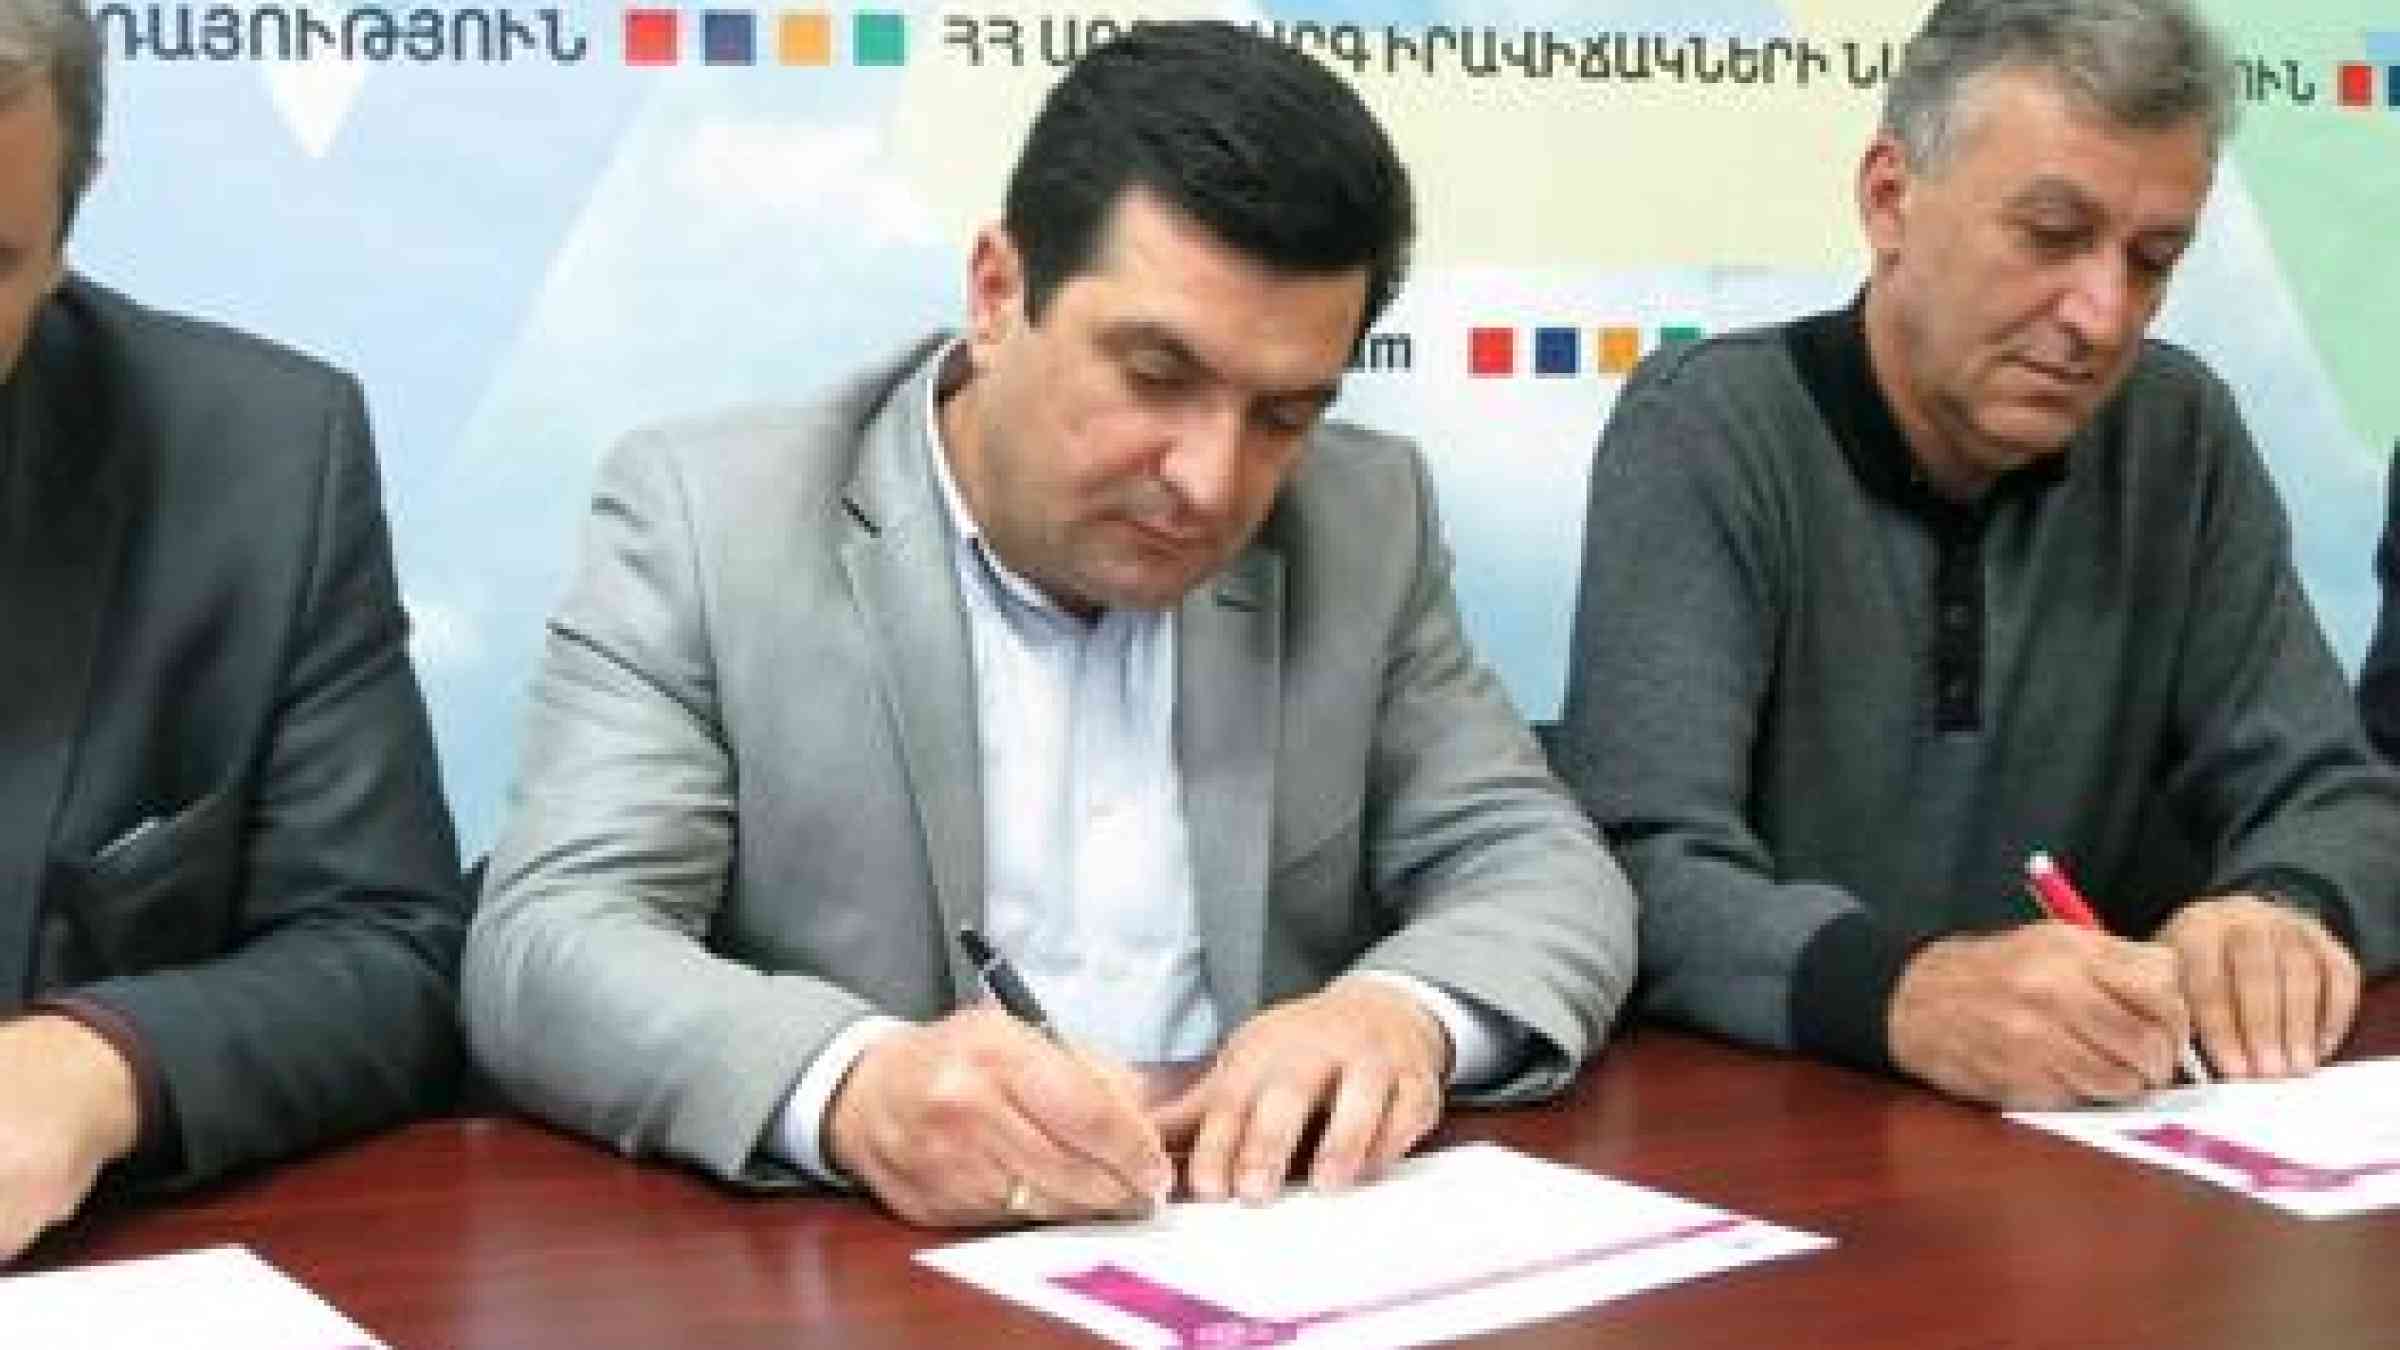 Spitak DeputyMayor Vardan Sahakyan signs up for the Making Cities Resilient Campaign determined to build a safer city after a 'very bad and bitter experience.' (Photo: UNISDR)